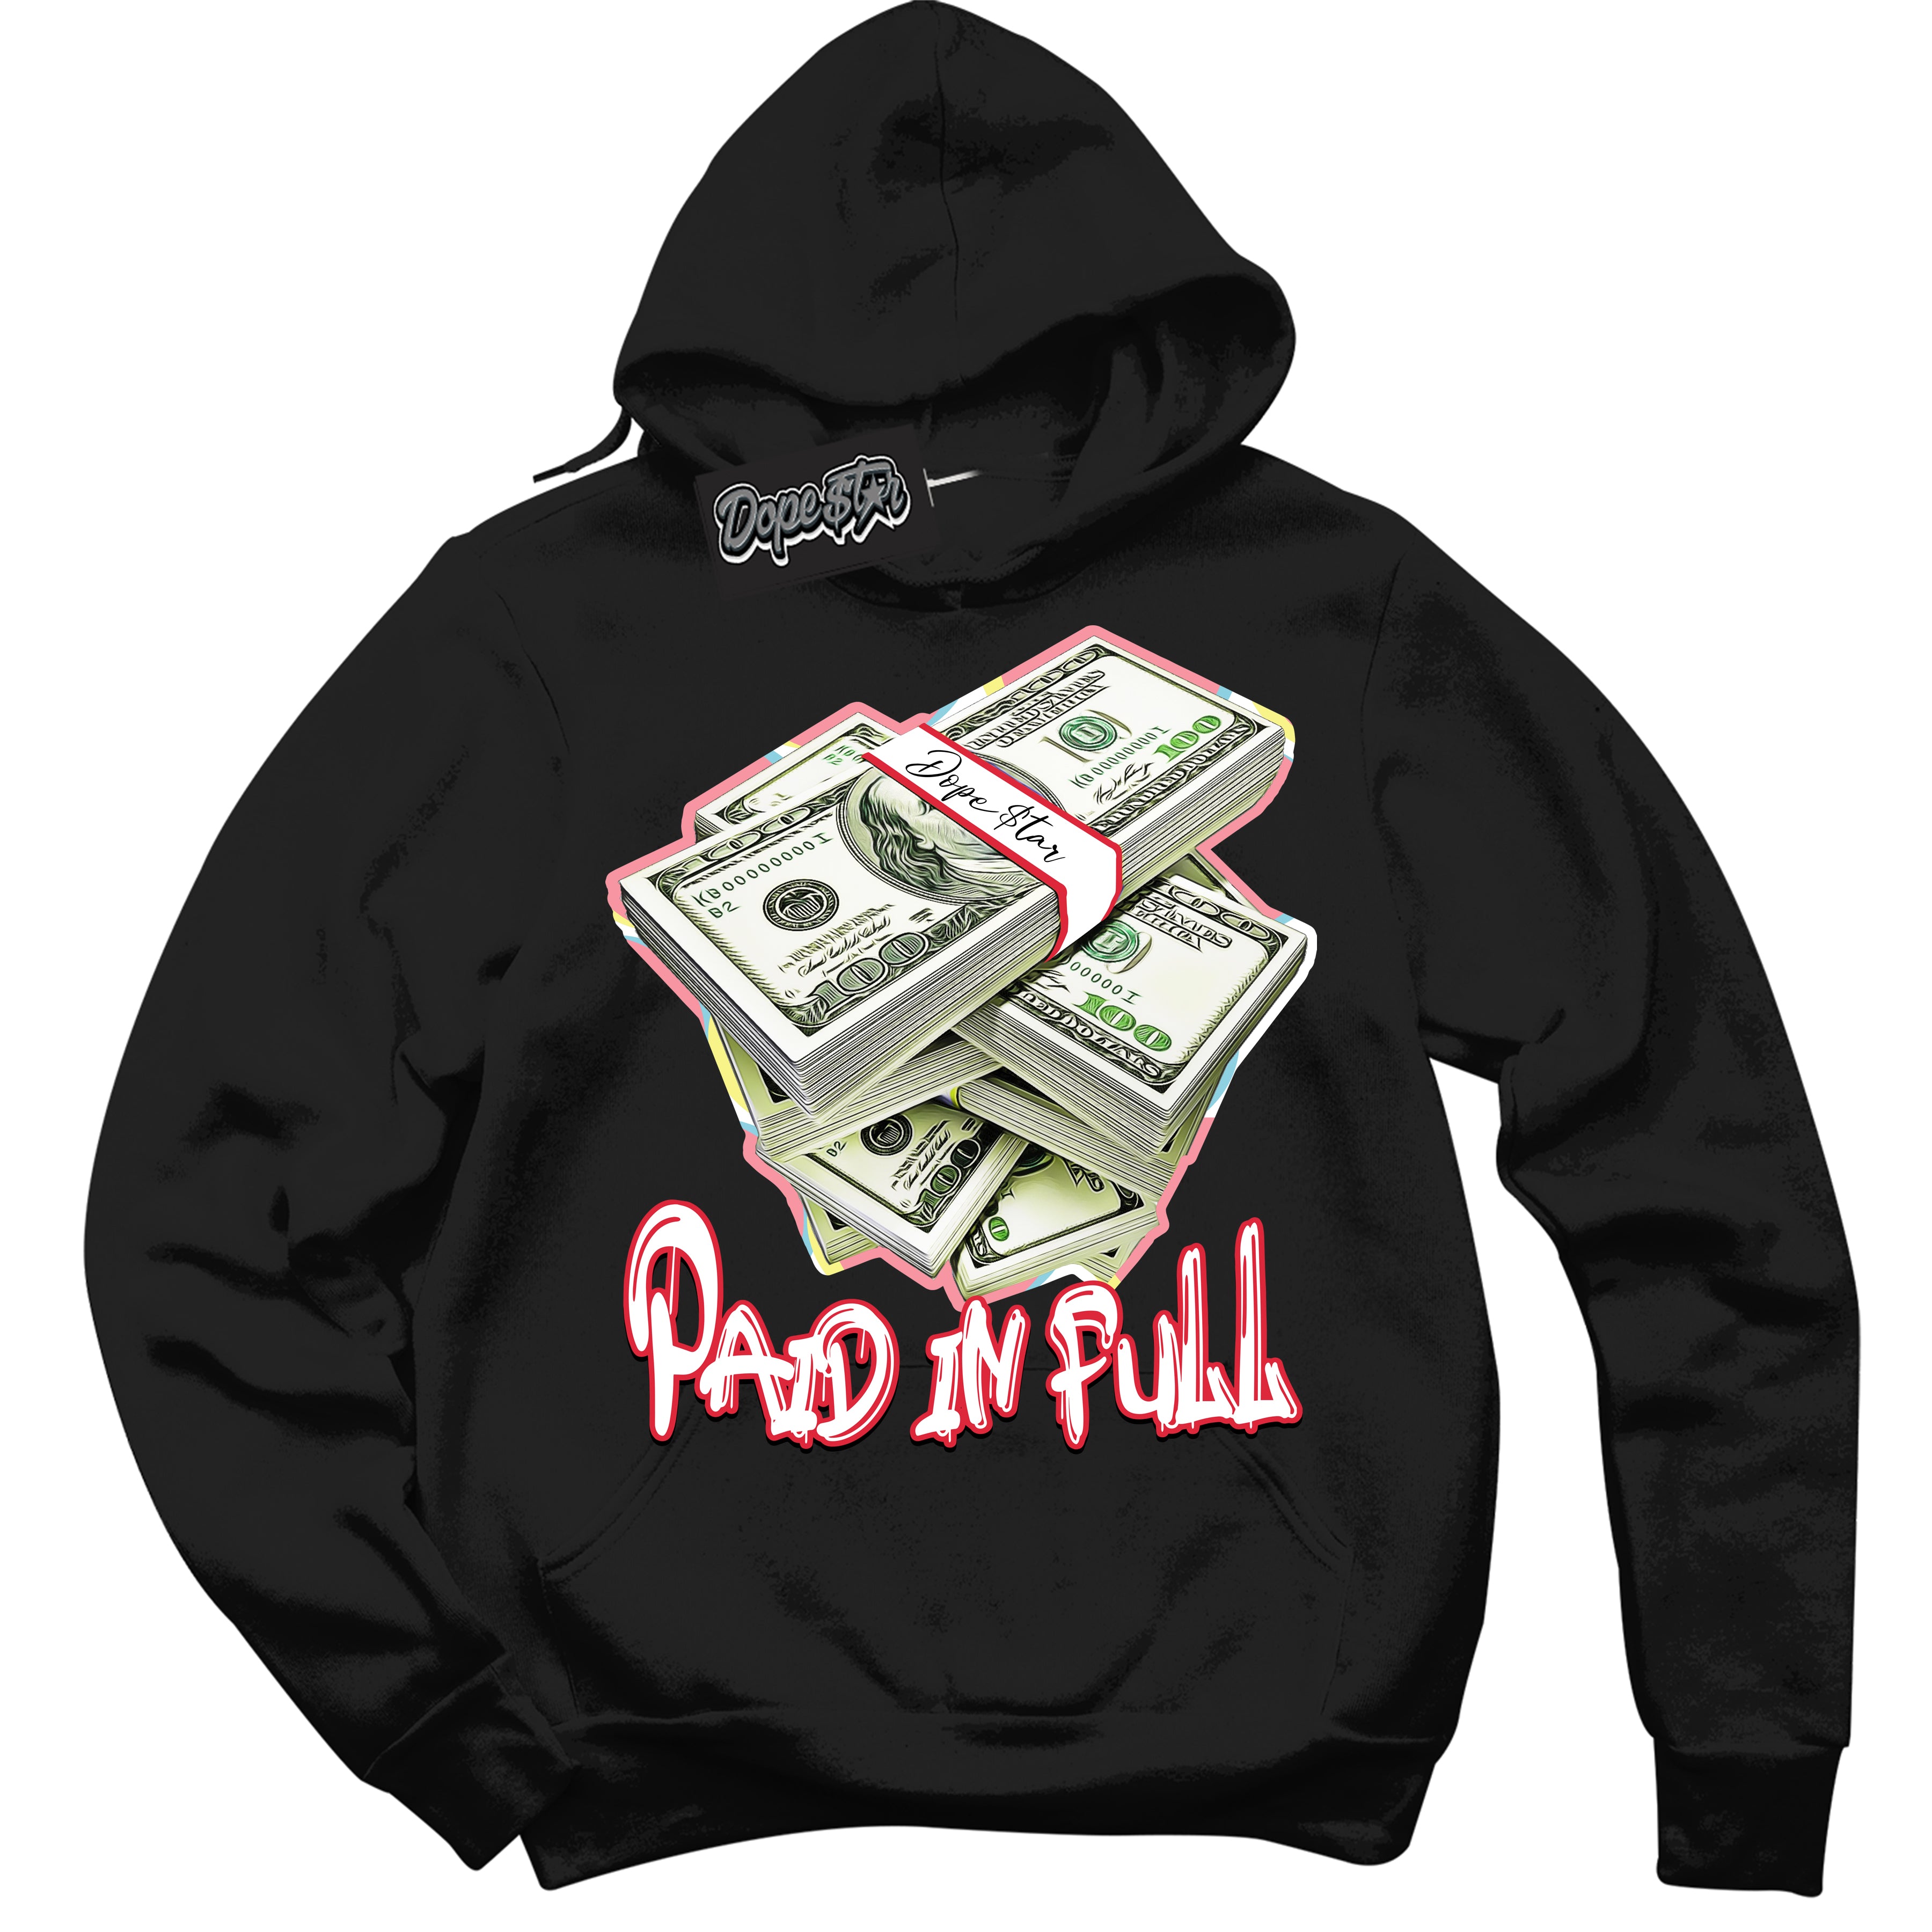 Cool Black Graphic DopeStar Hoodie with “ Paid In Full “ print, that perfectly matches Spider-Verse 1s sneakers